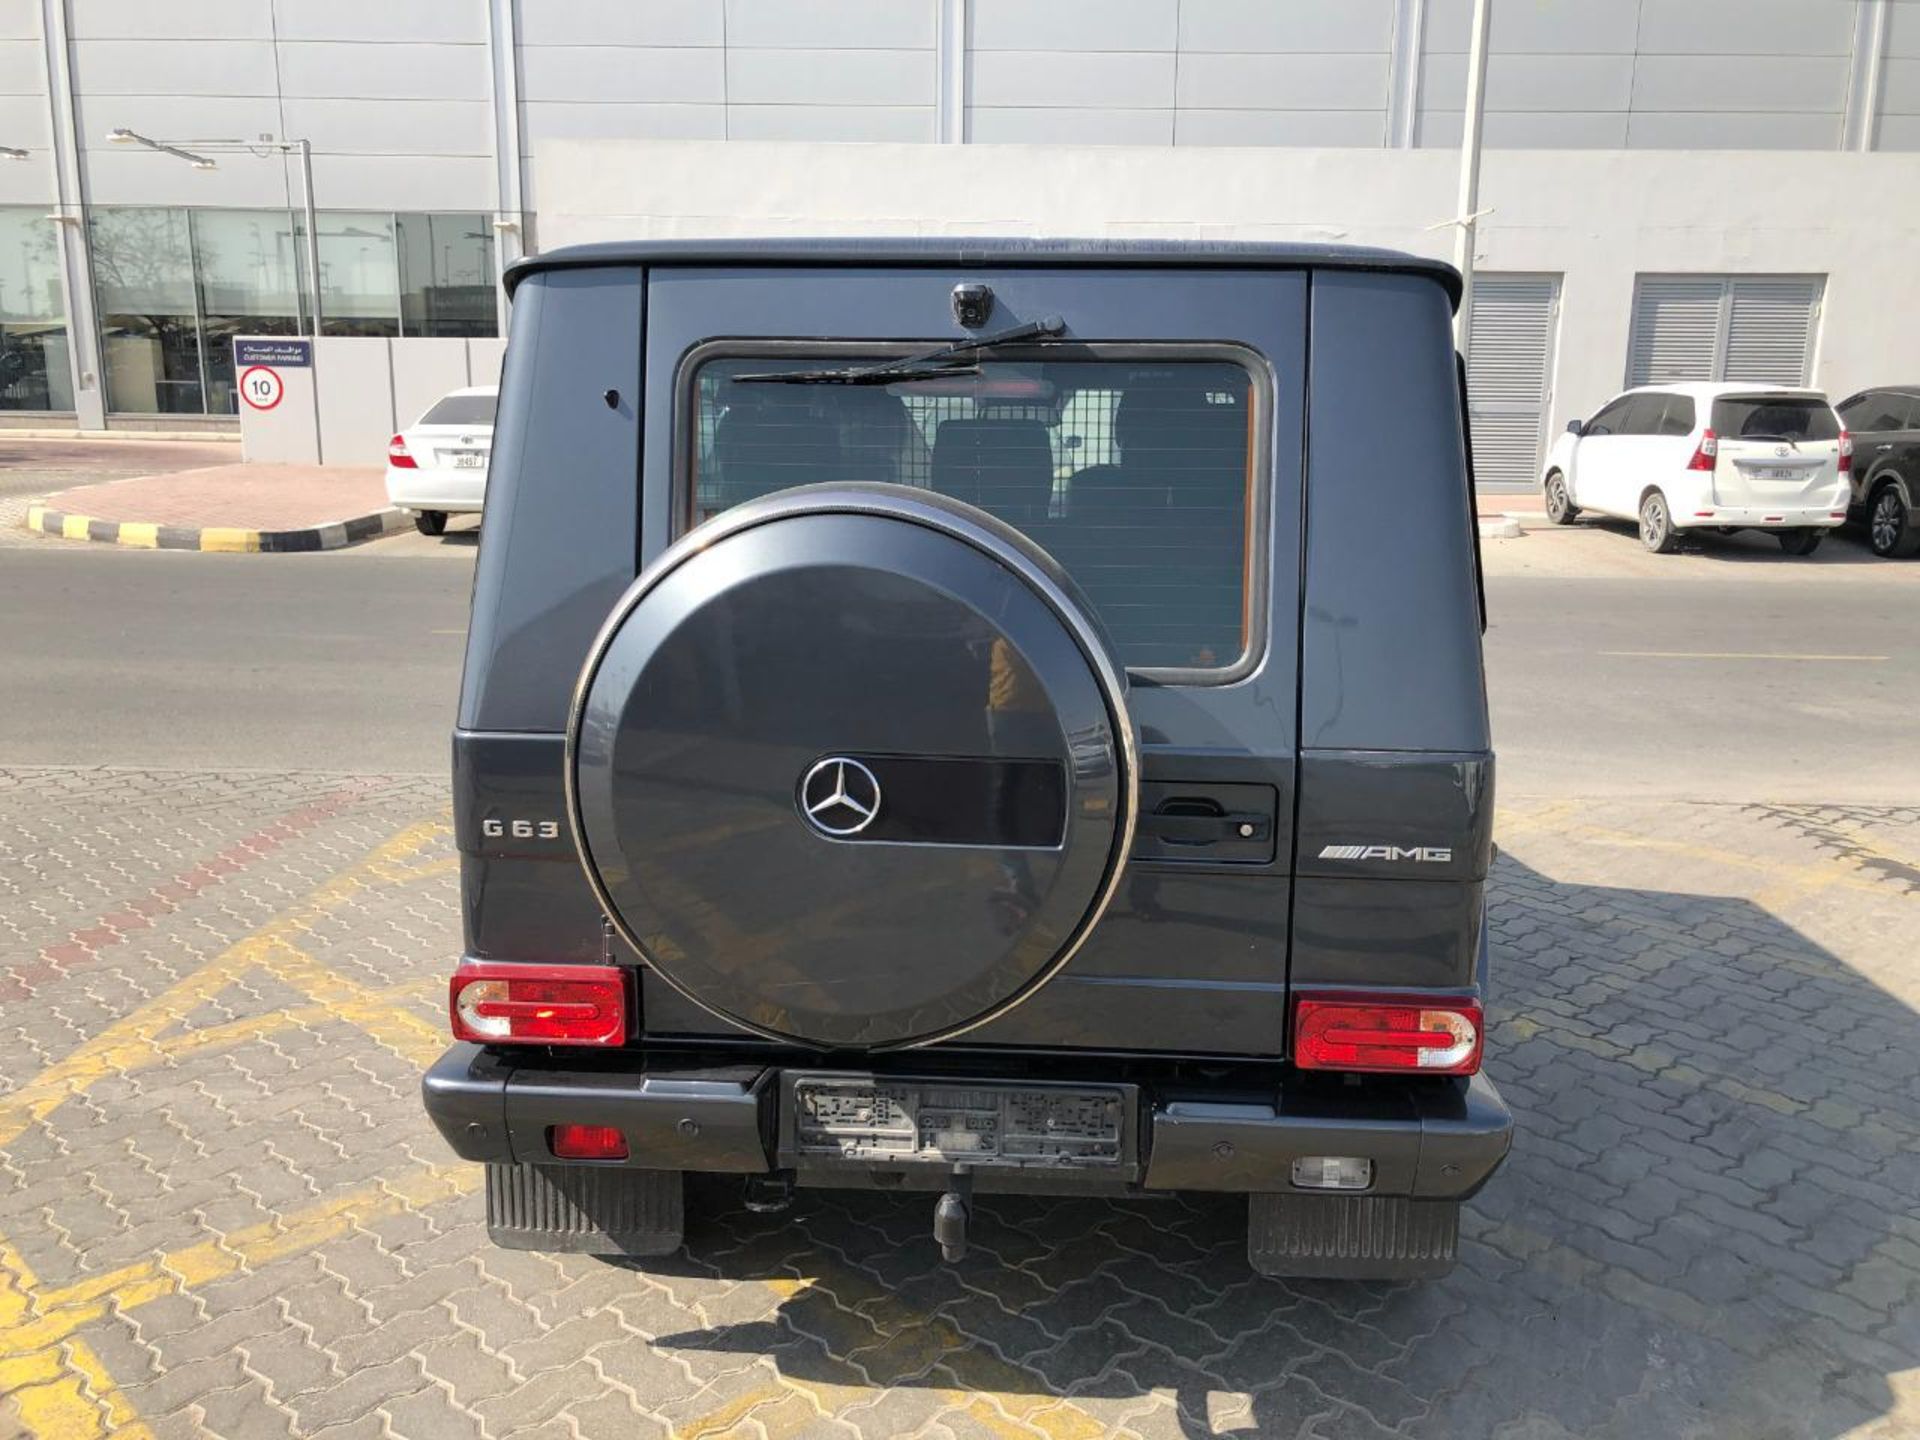 2014 Mercedes G63 65,000 km Service history Dark charcoal grey With 2 tone interior - Image 4 of 6